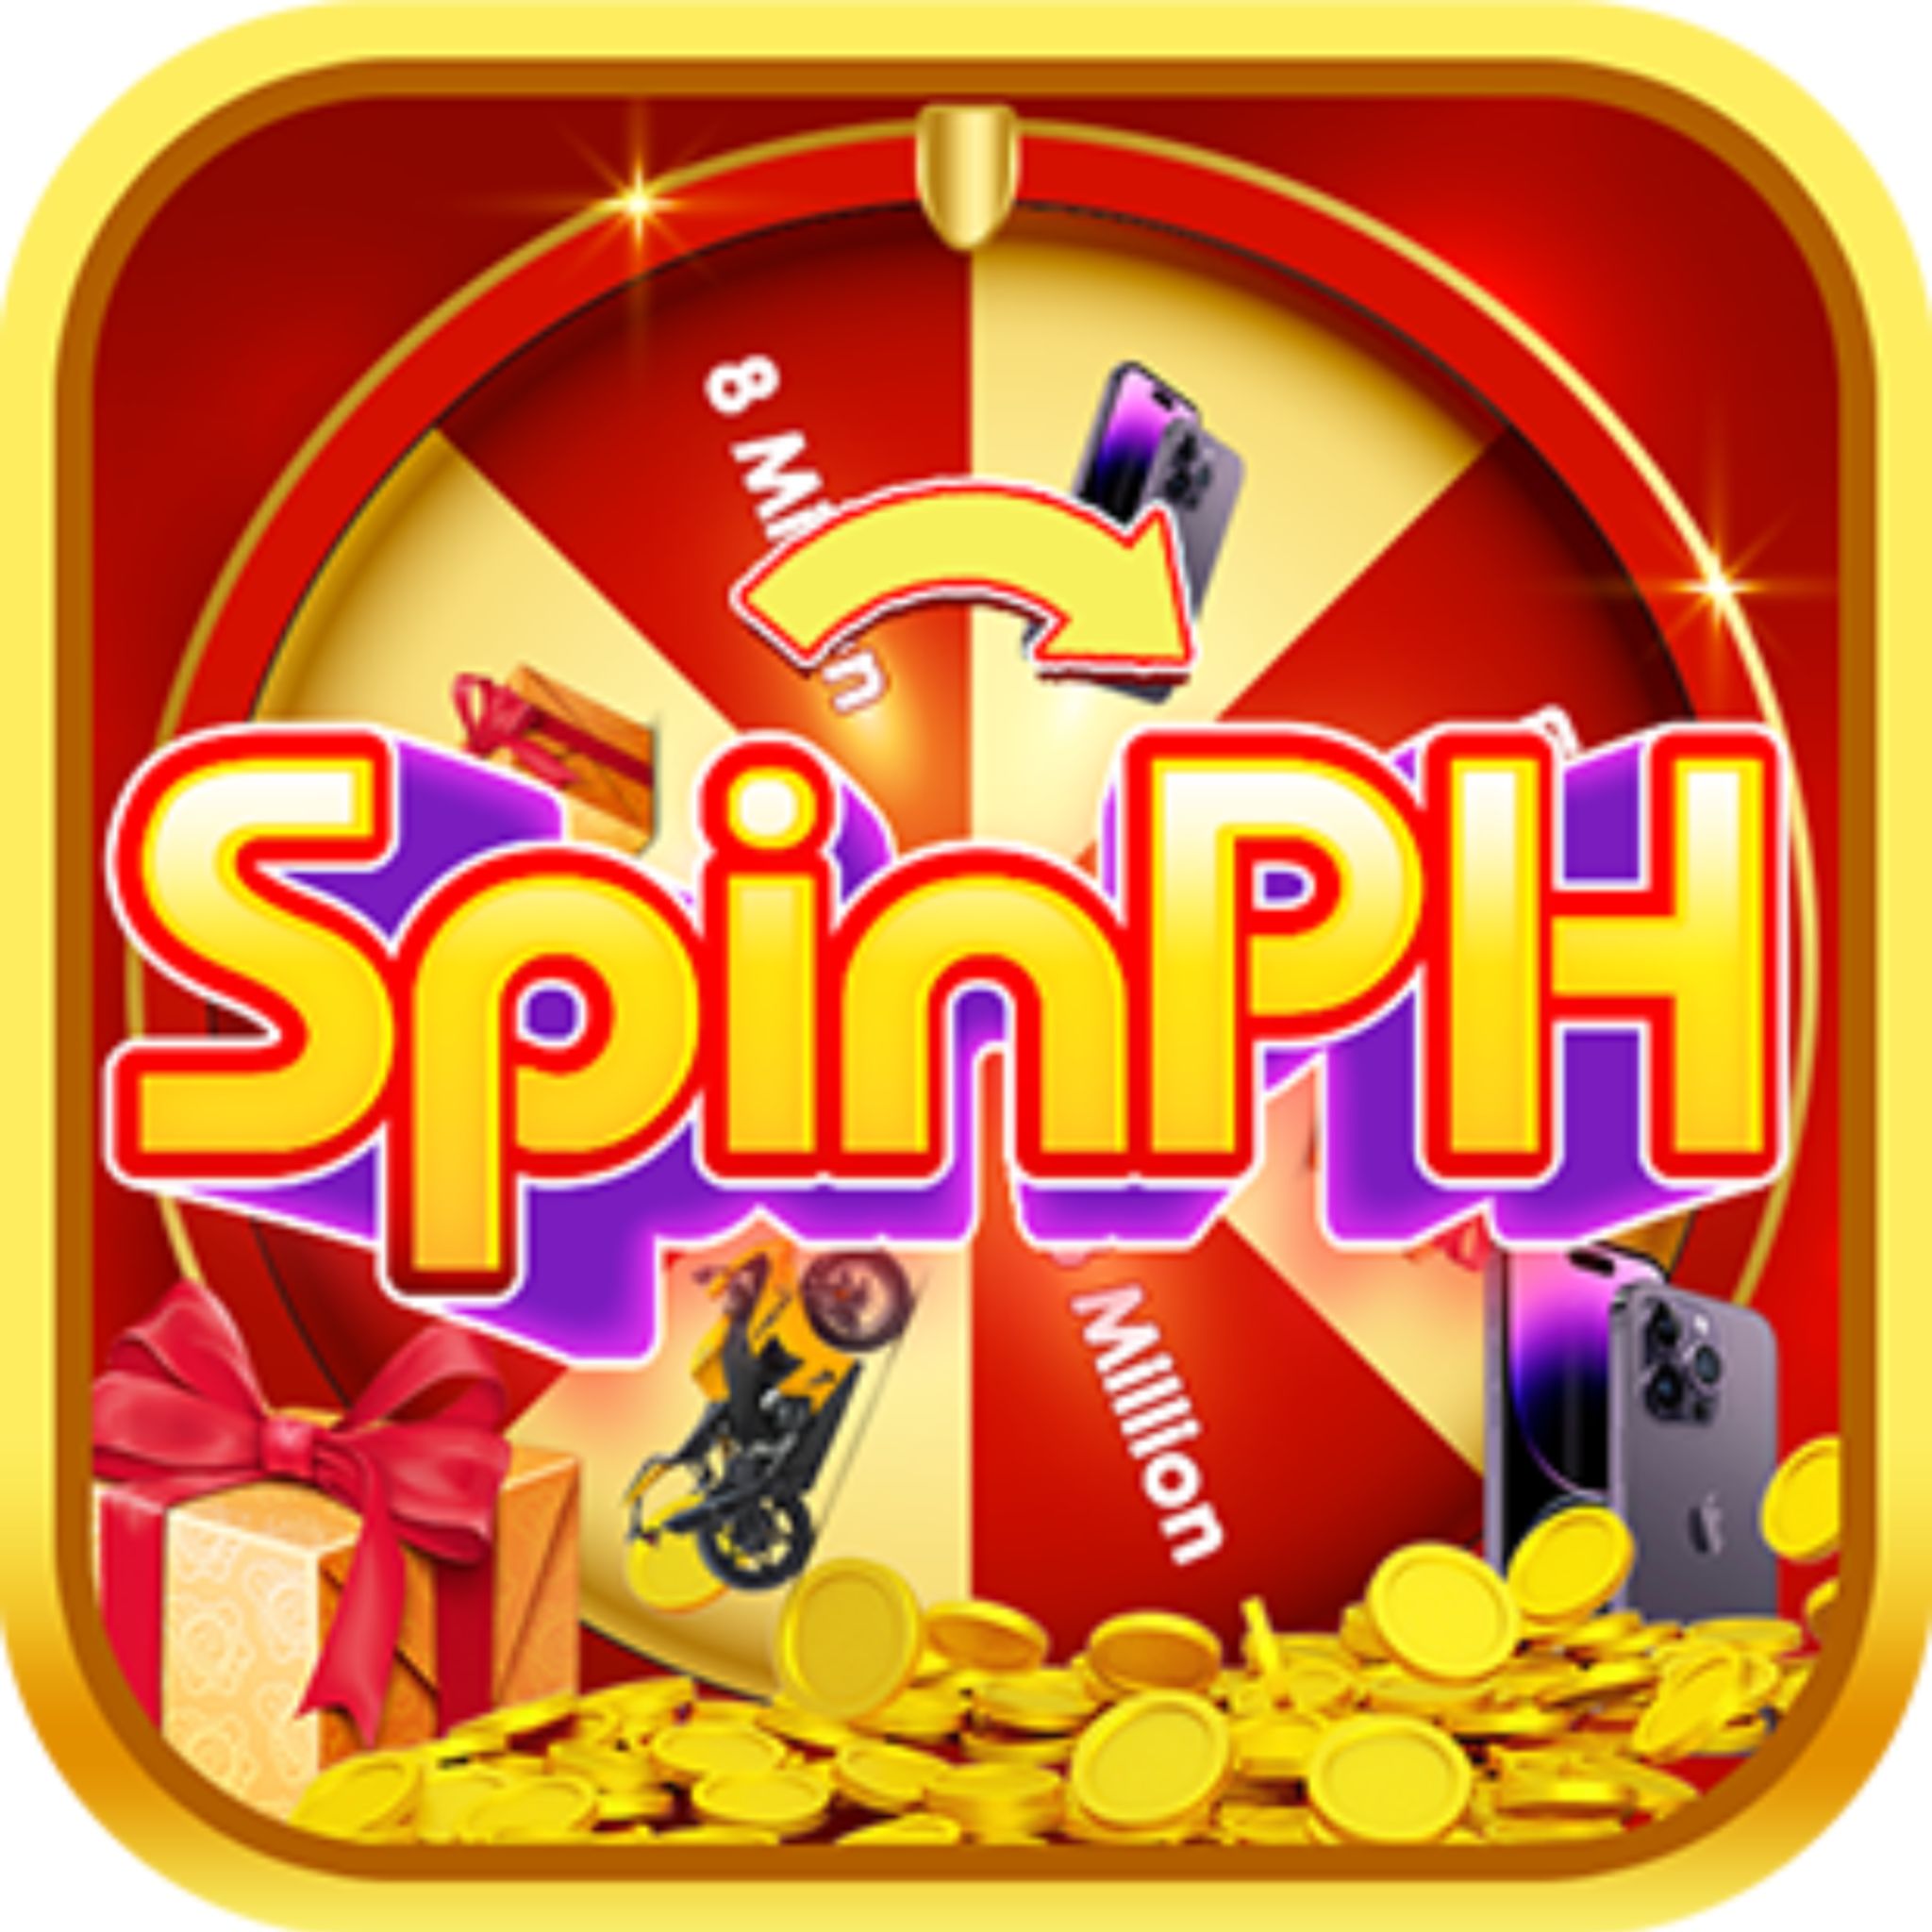 You are currently viewing SpinPH8 Casino Online